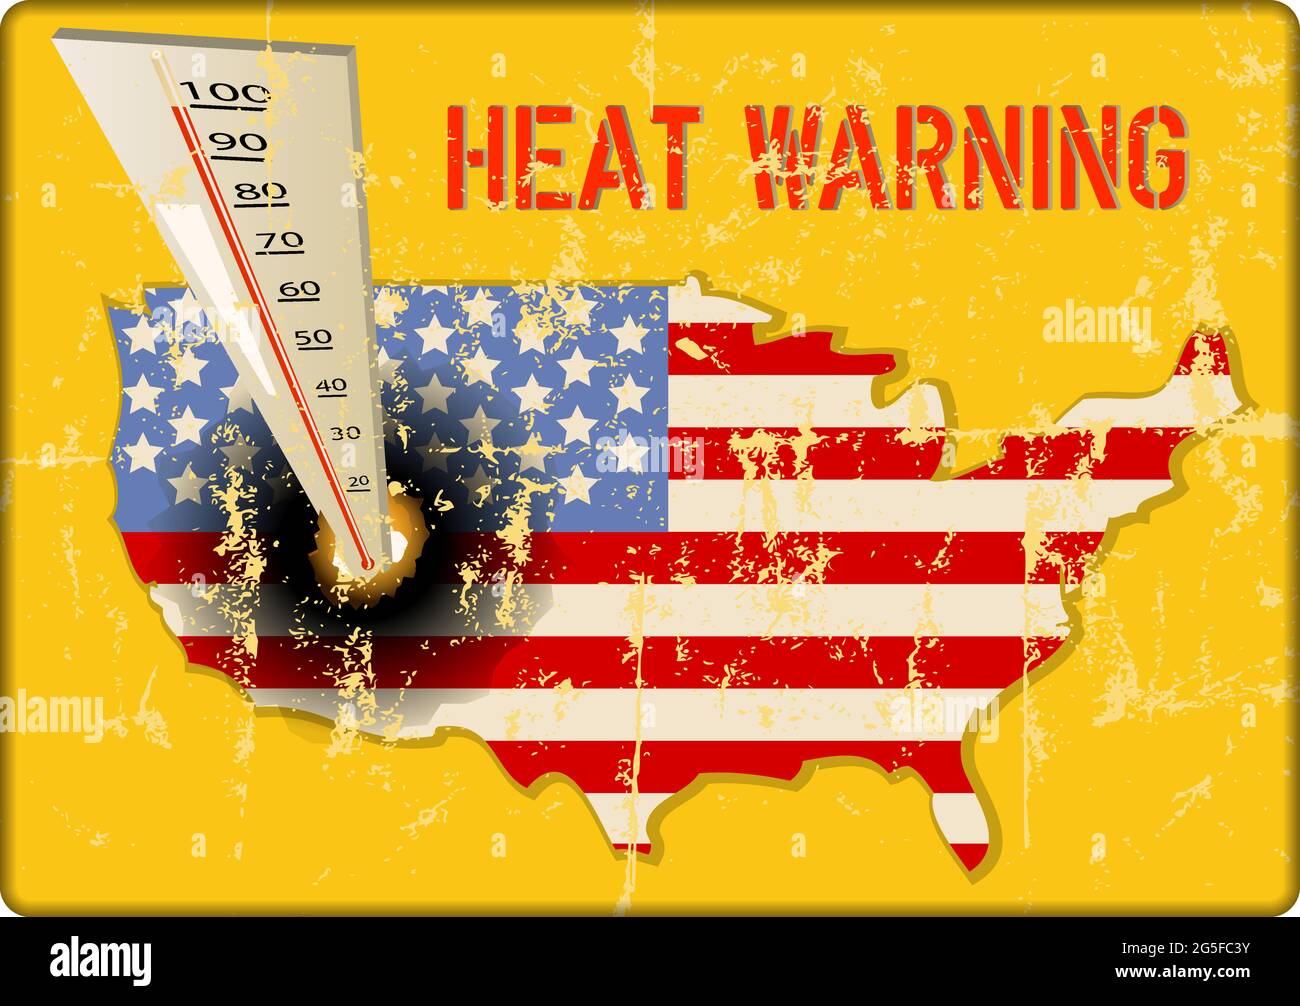 Vintage grungy heat warning sign, heatwave due to climate change in the USA, vector illustration Stock Vector